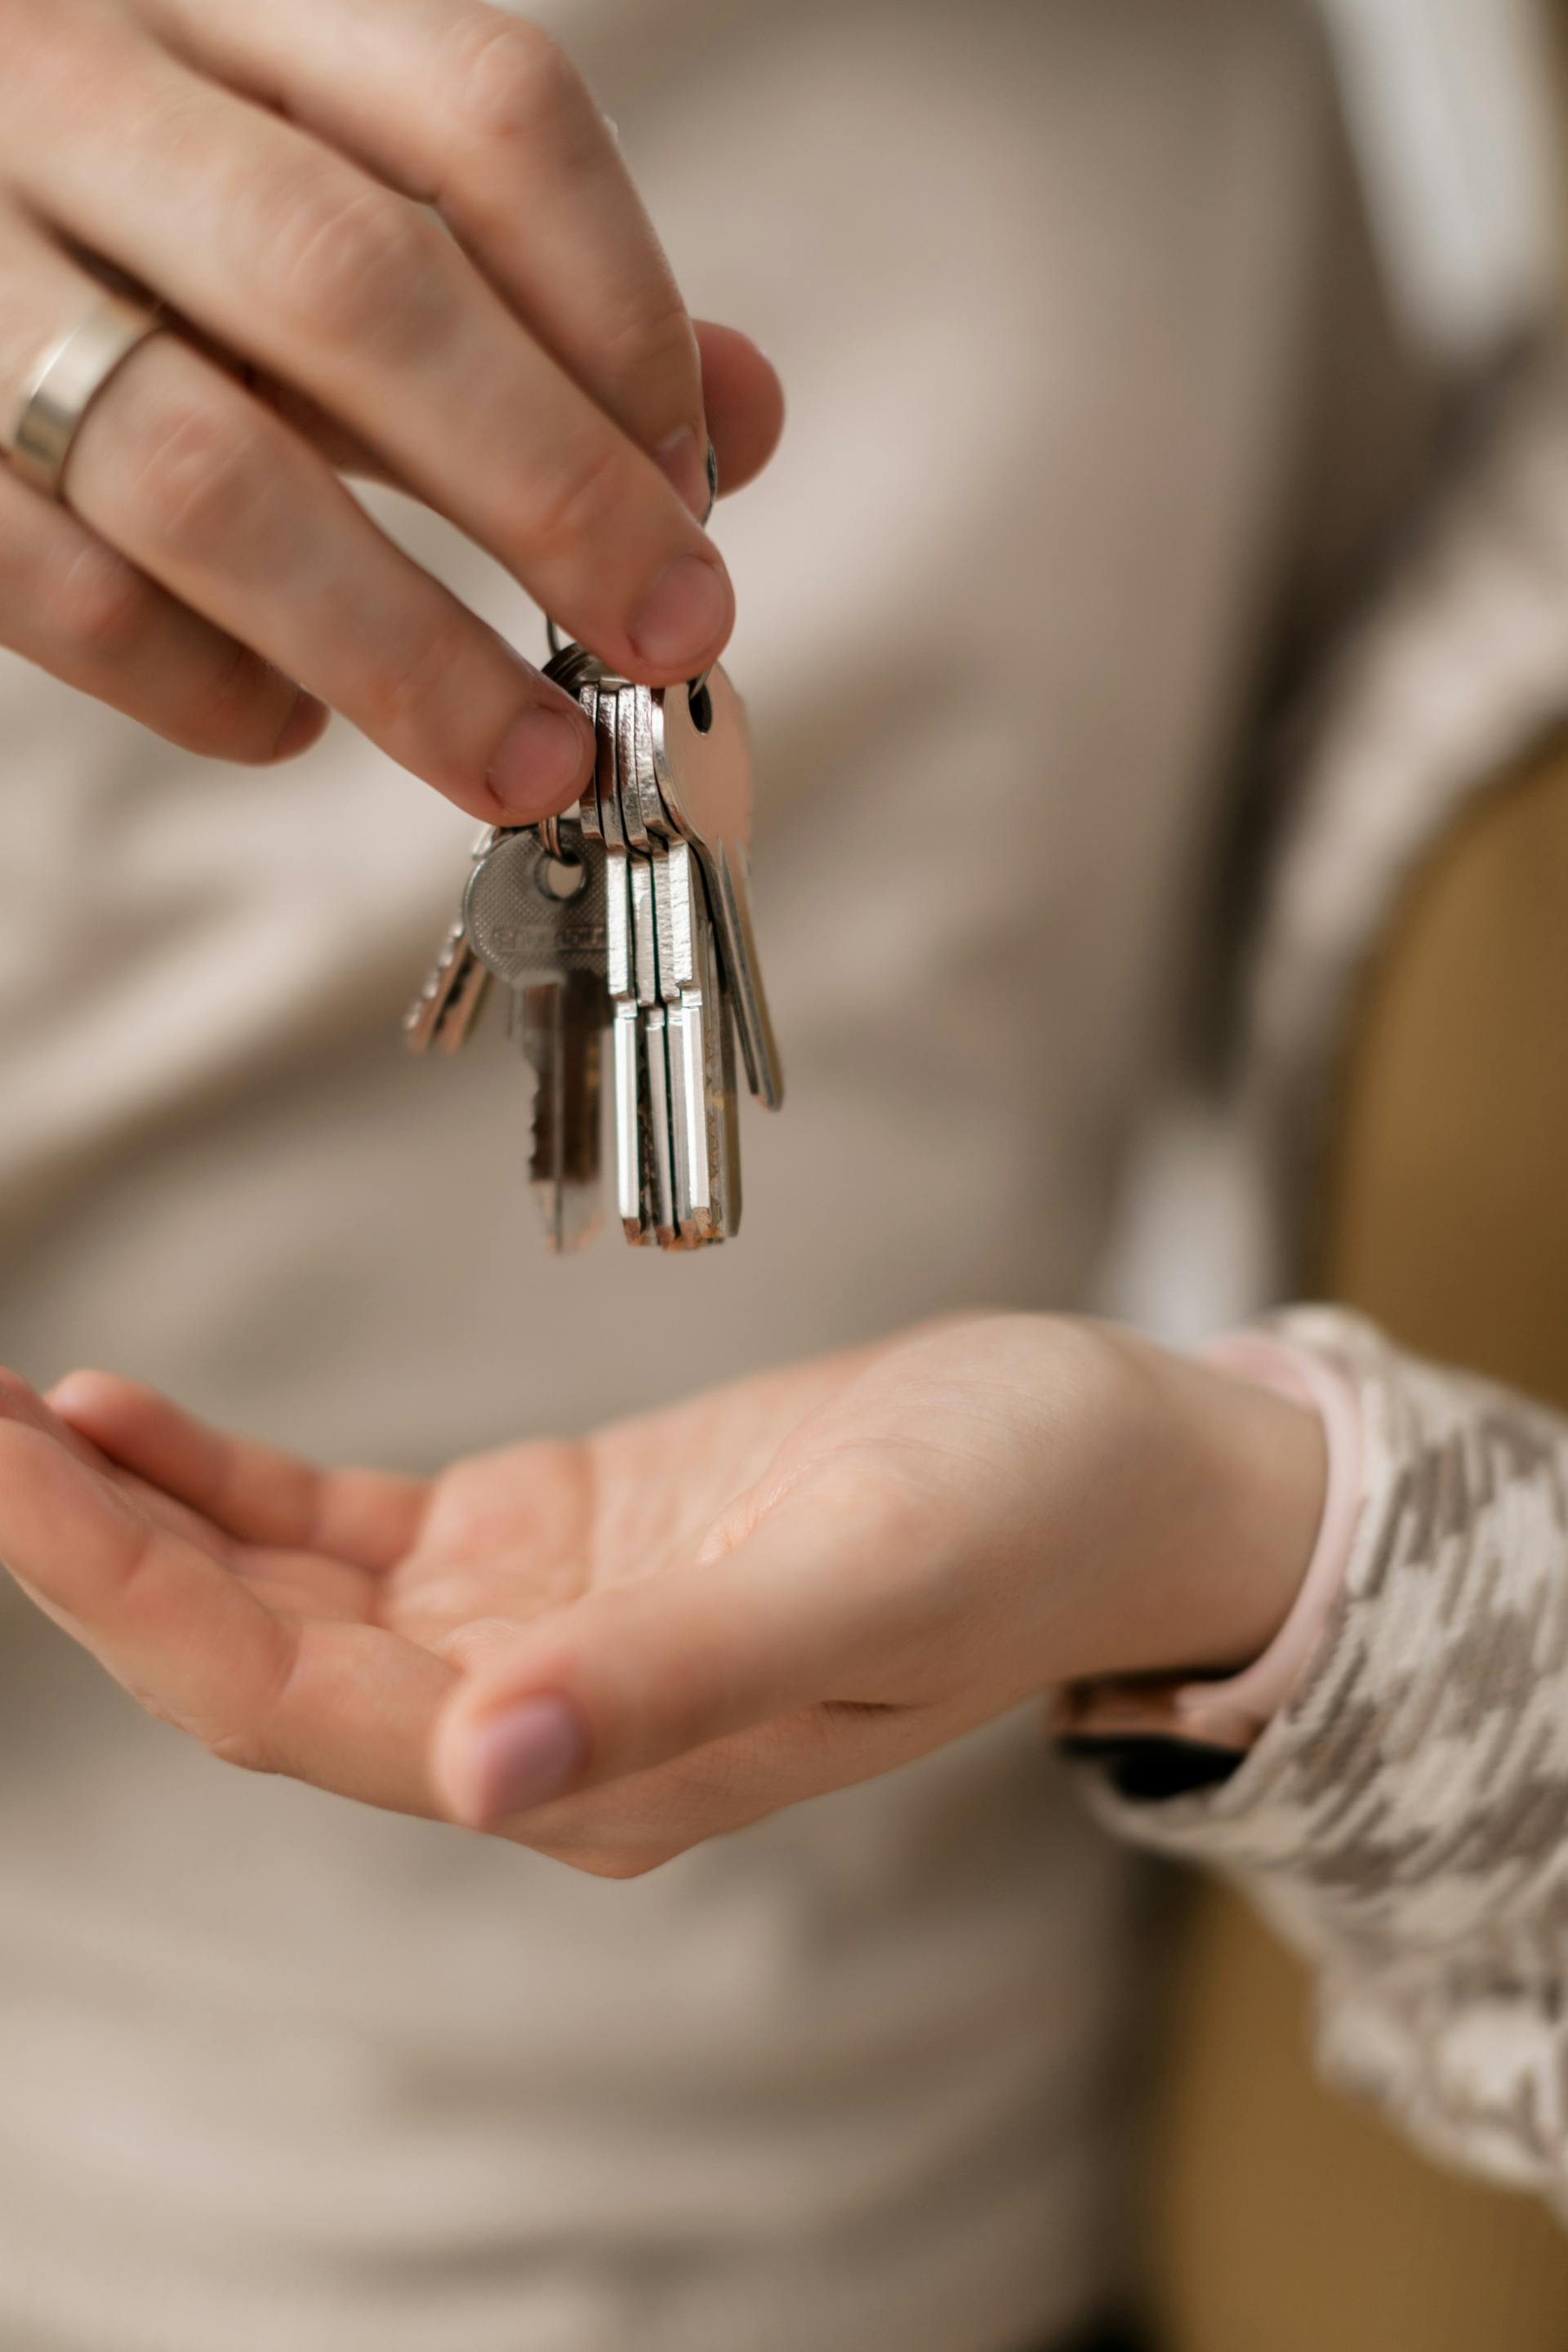 A person holding house keys | Source: Pexels